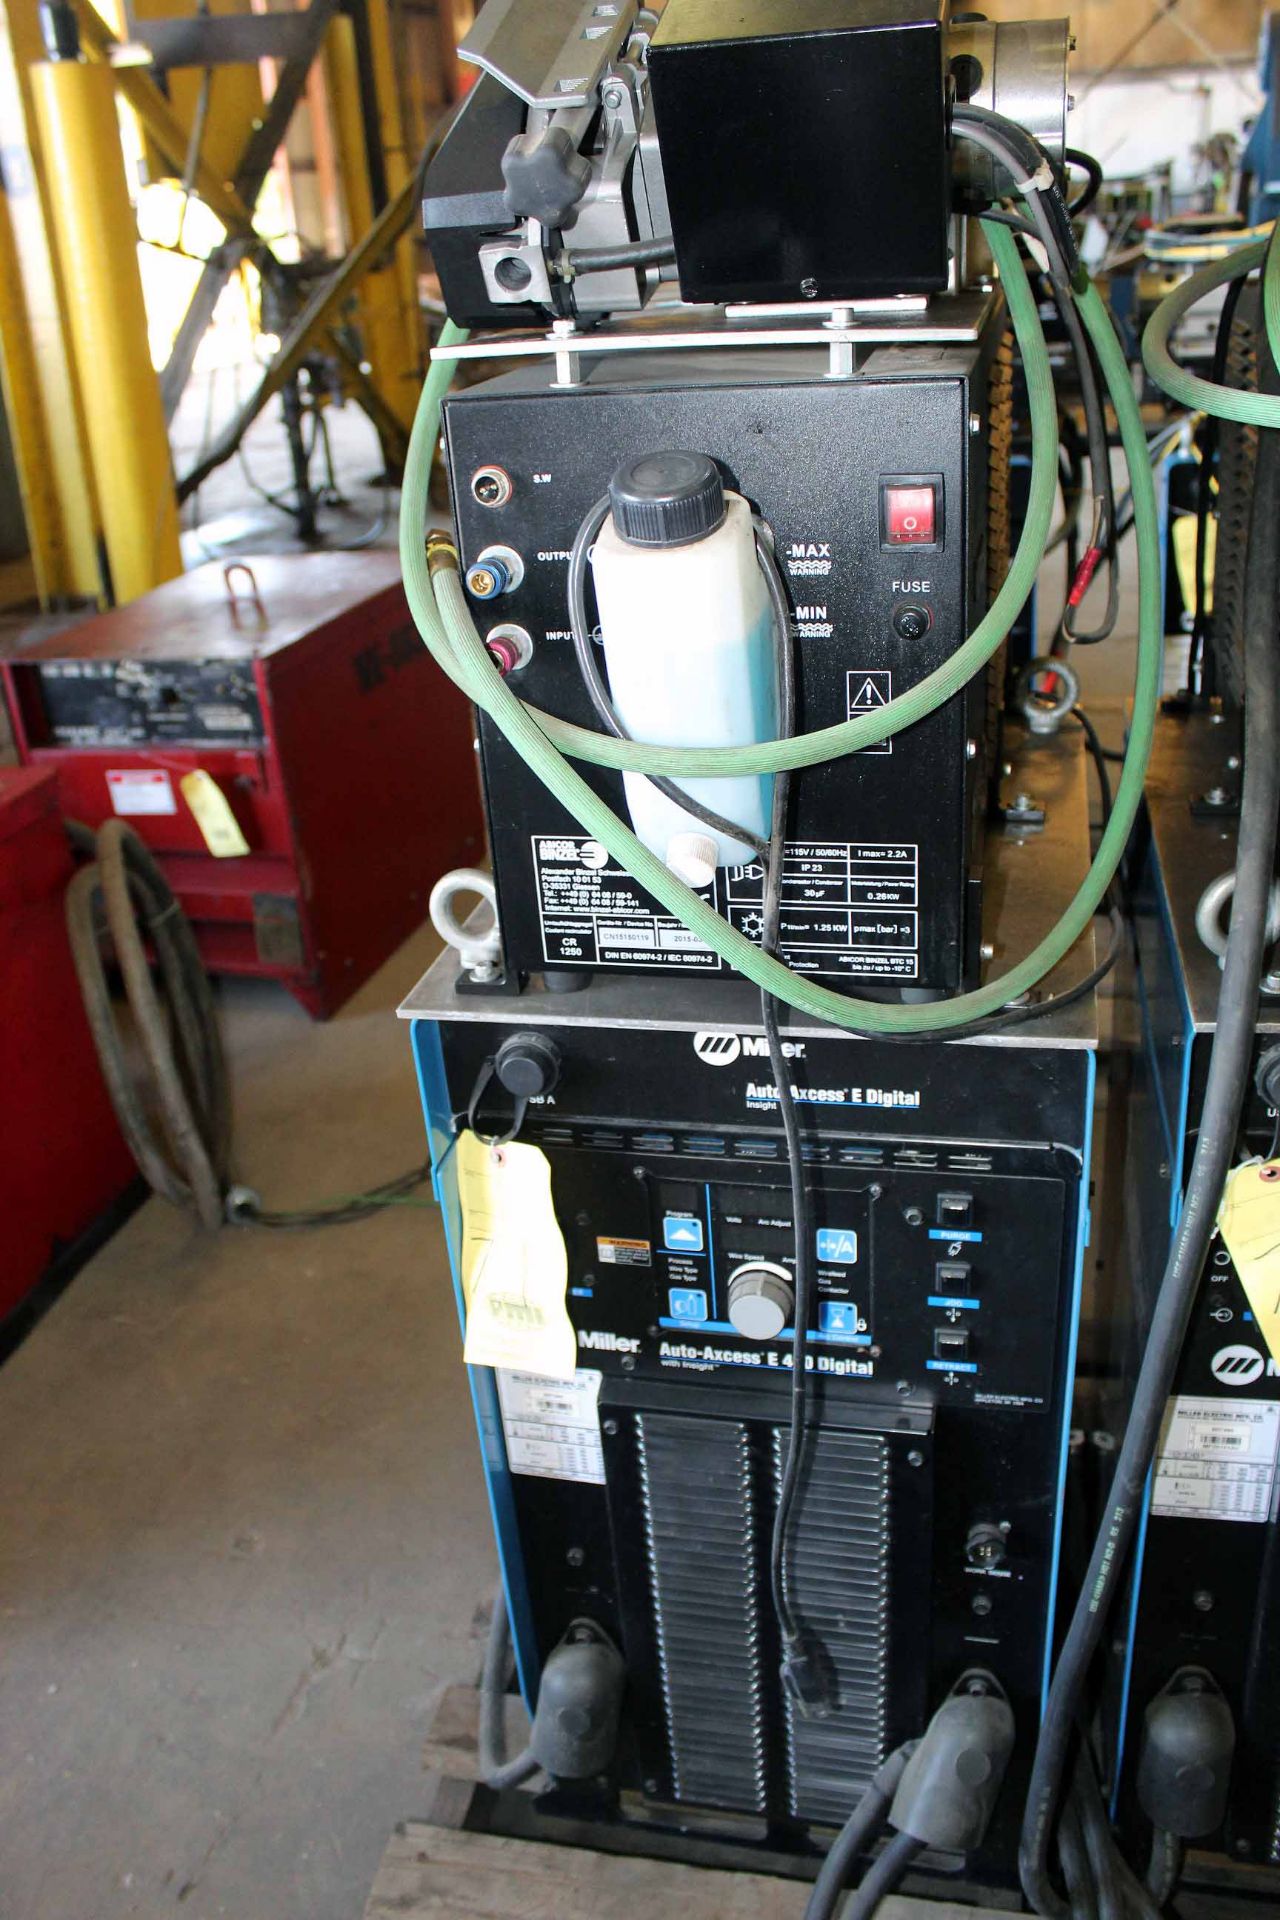 MIG WELDER, MILLER MDL. AUTO-AXCESS E450, new 2016, wire feed units on pwrd. slides, S/N